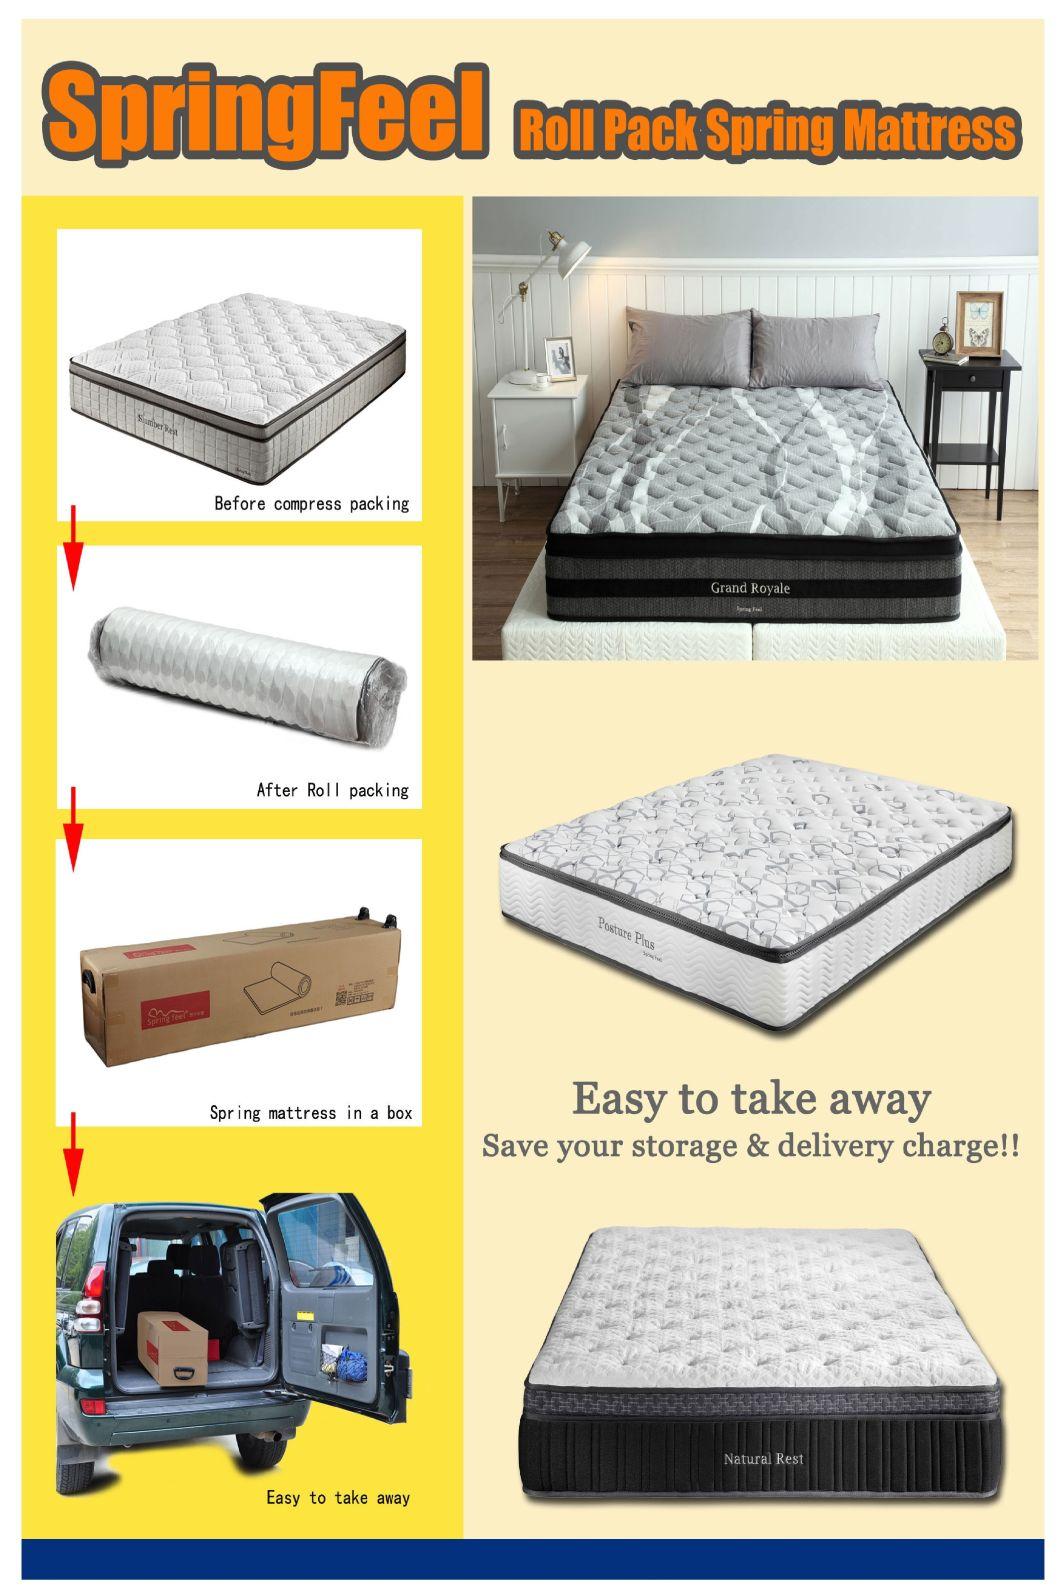 Customized Modern Euro Top Gel Memory Foam Pocket Spring Mattress with Latex Eb15-18 Queen Size